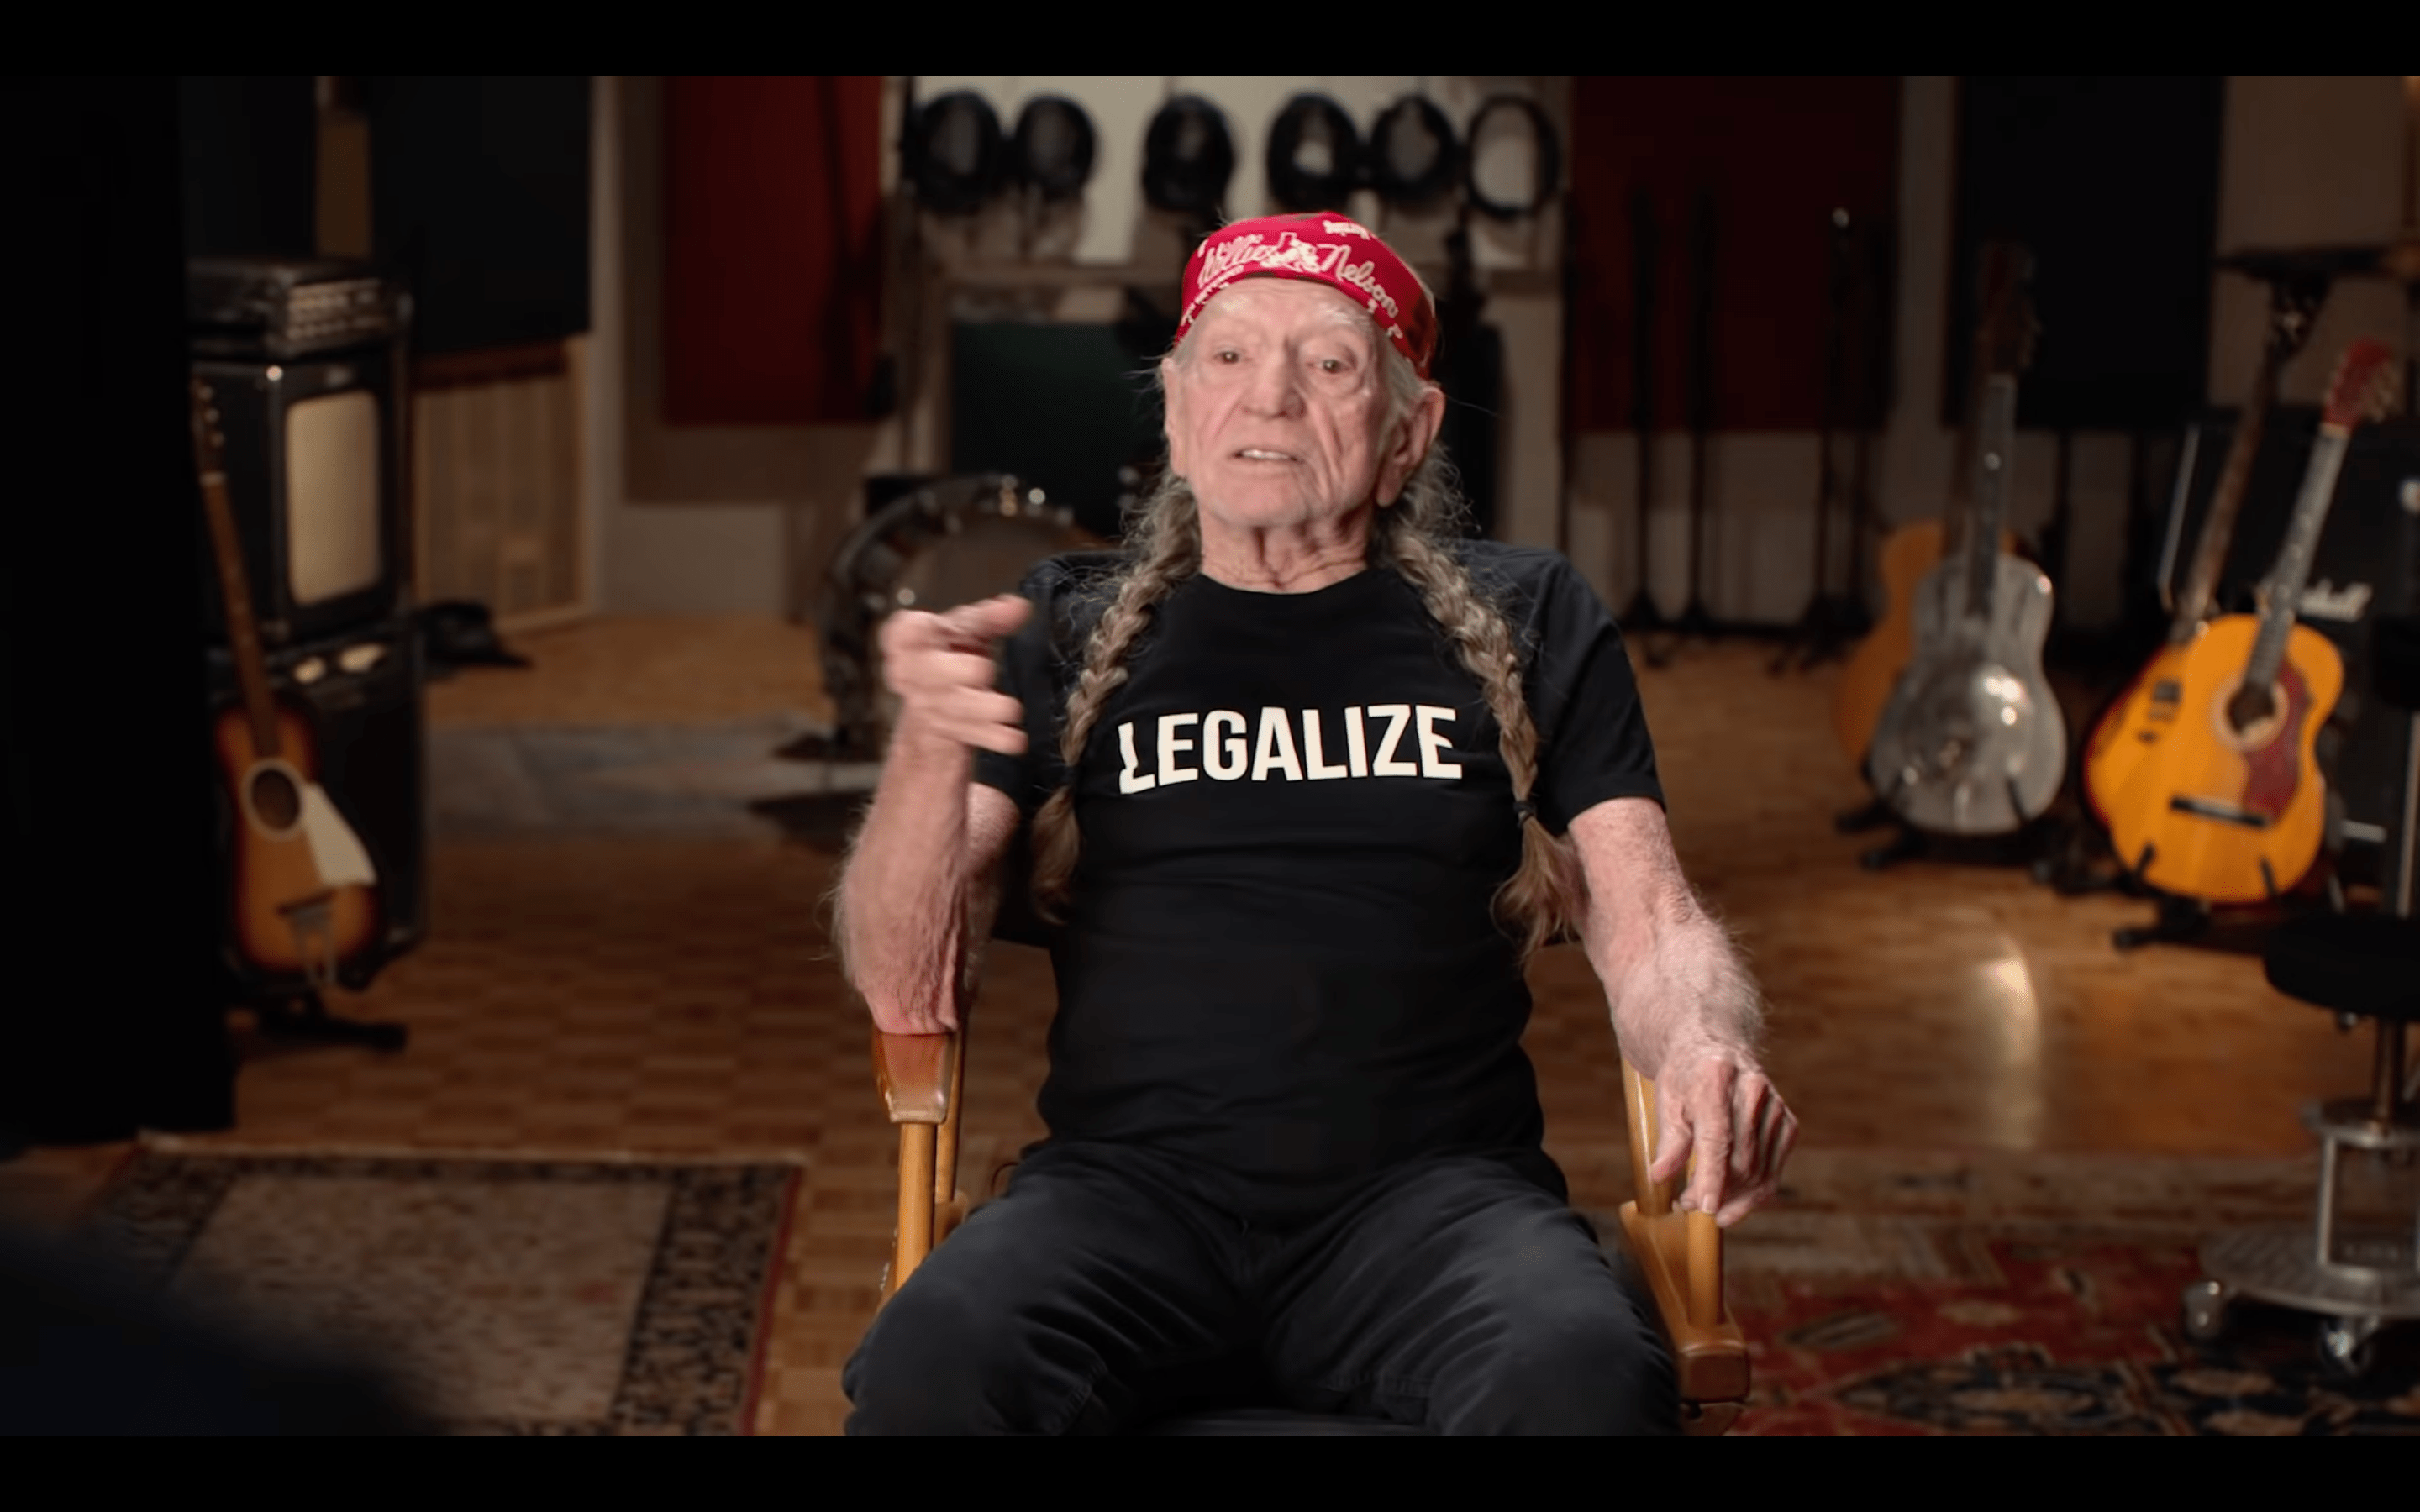 Watch the Willie Nelson for Skechers – “Legalize” Big Game commercial - https://www.youtube.com/watch?v=yLniw4PvLj8